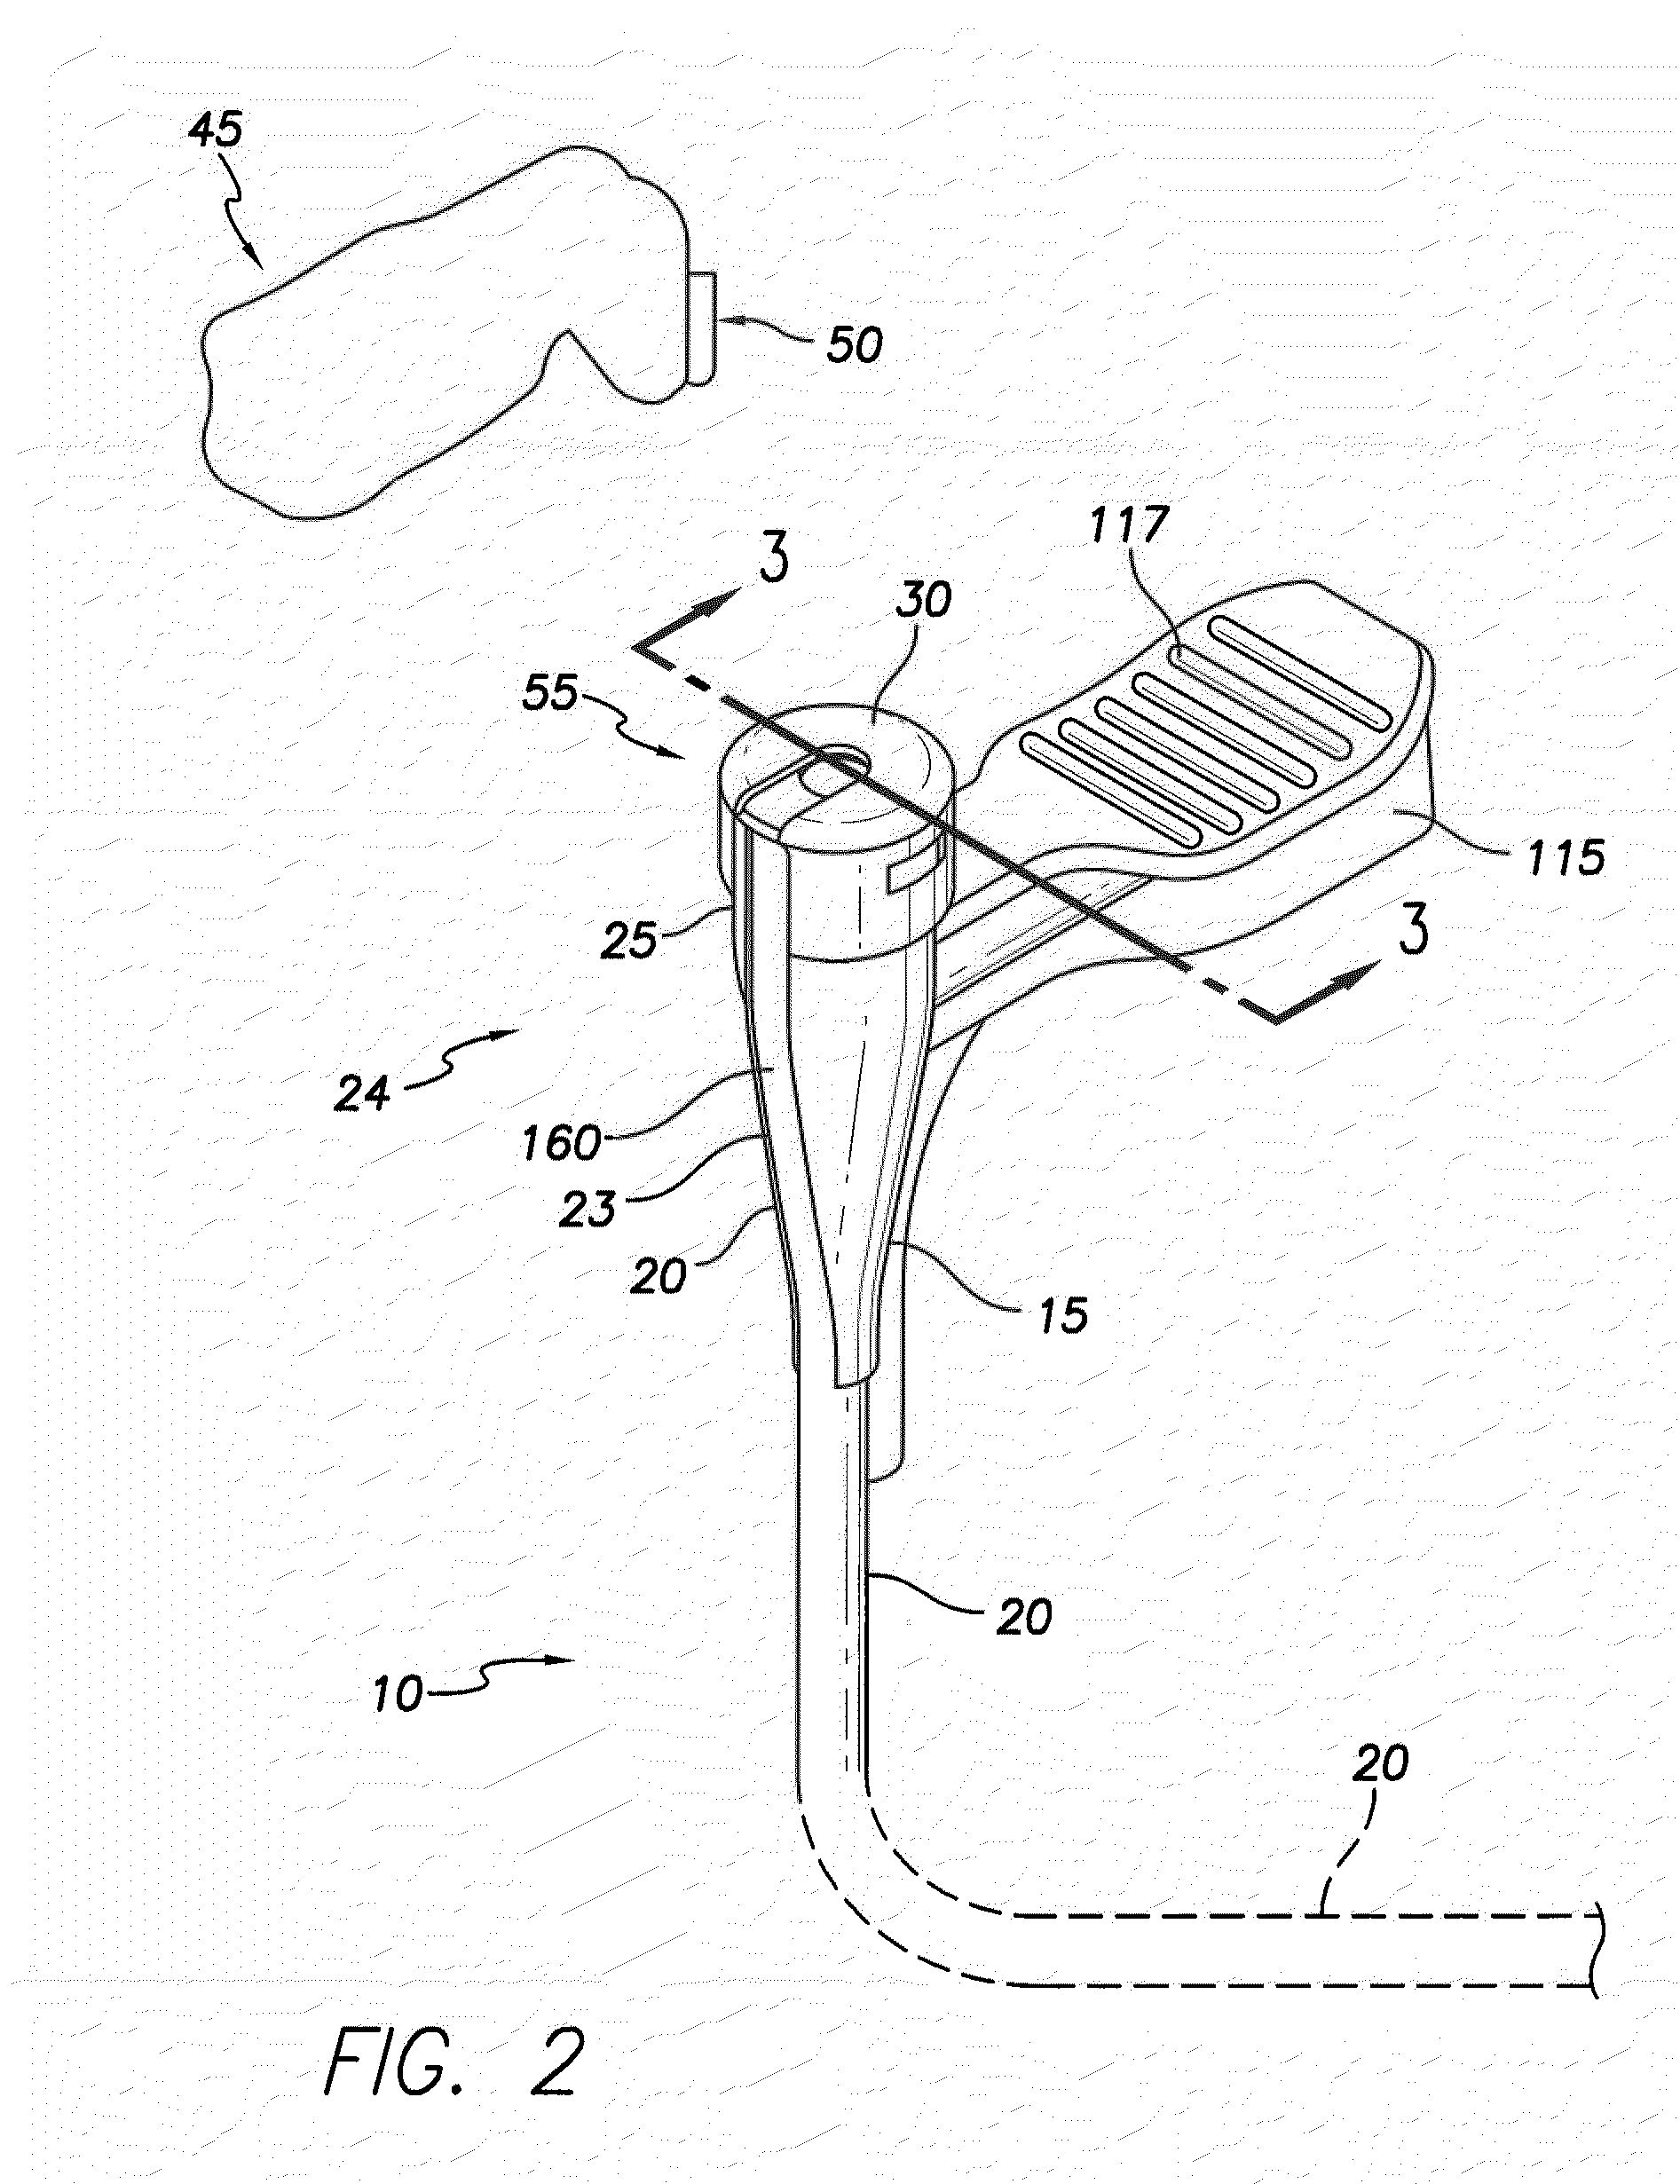 Slittable delivery device assembly for the delivery of a cardiac surgical device